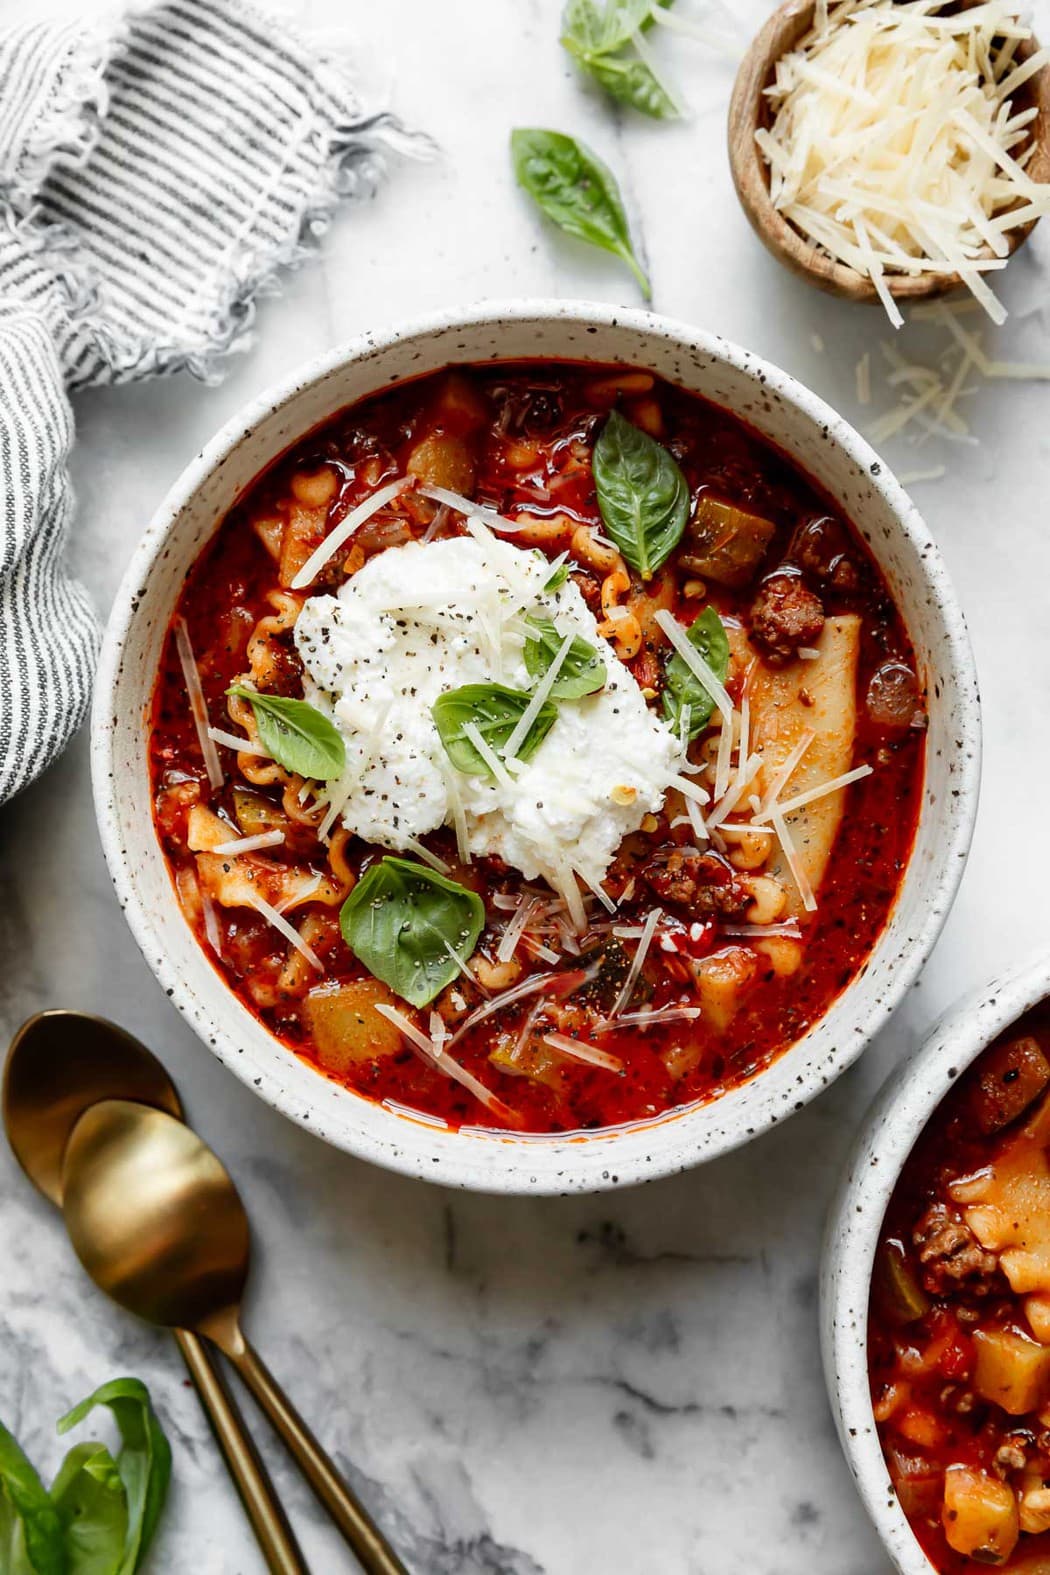 Instant Pot Lasagna Soup in a white pottery bowl topped with a dollop of ricotta cheese, shredded parmesan cheese, and fresh basil leaves - one of the recipes for this week's healthy weekly meal plan